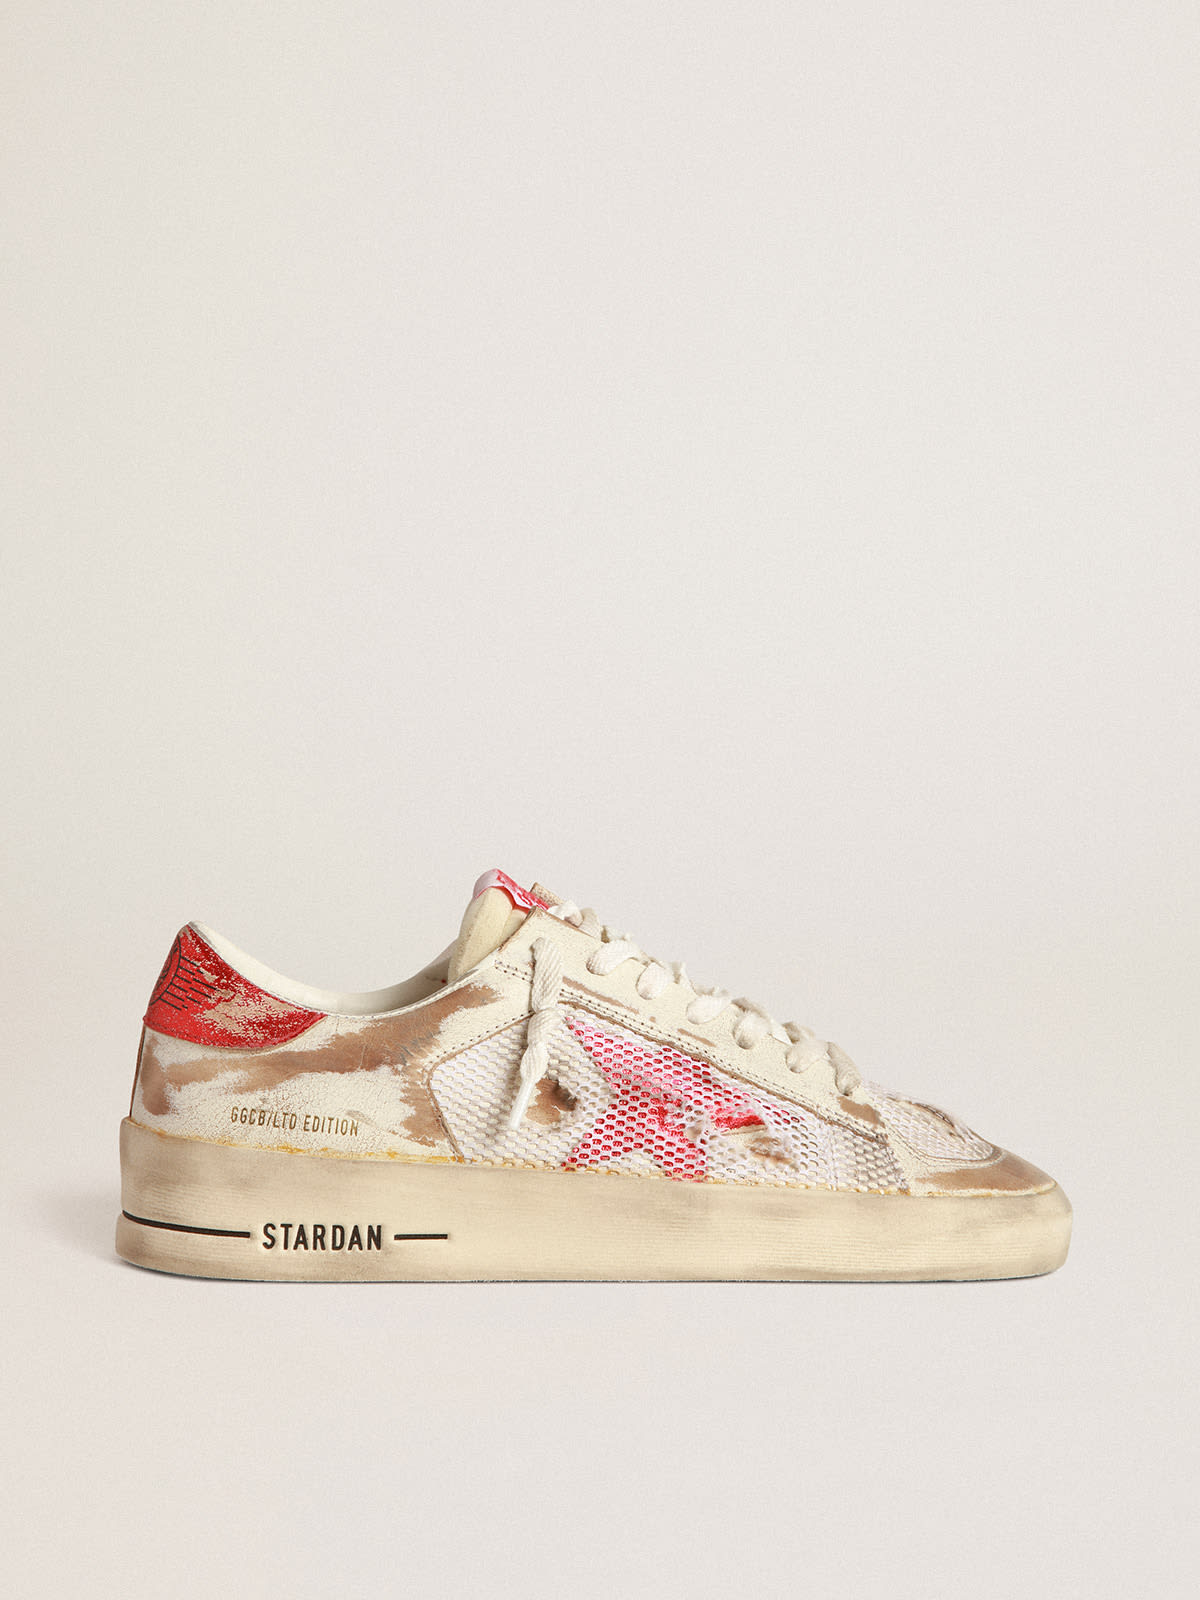 Golden Goose - Stardan LAB sneakers in white leather and mesh with red laminated leather star in 